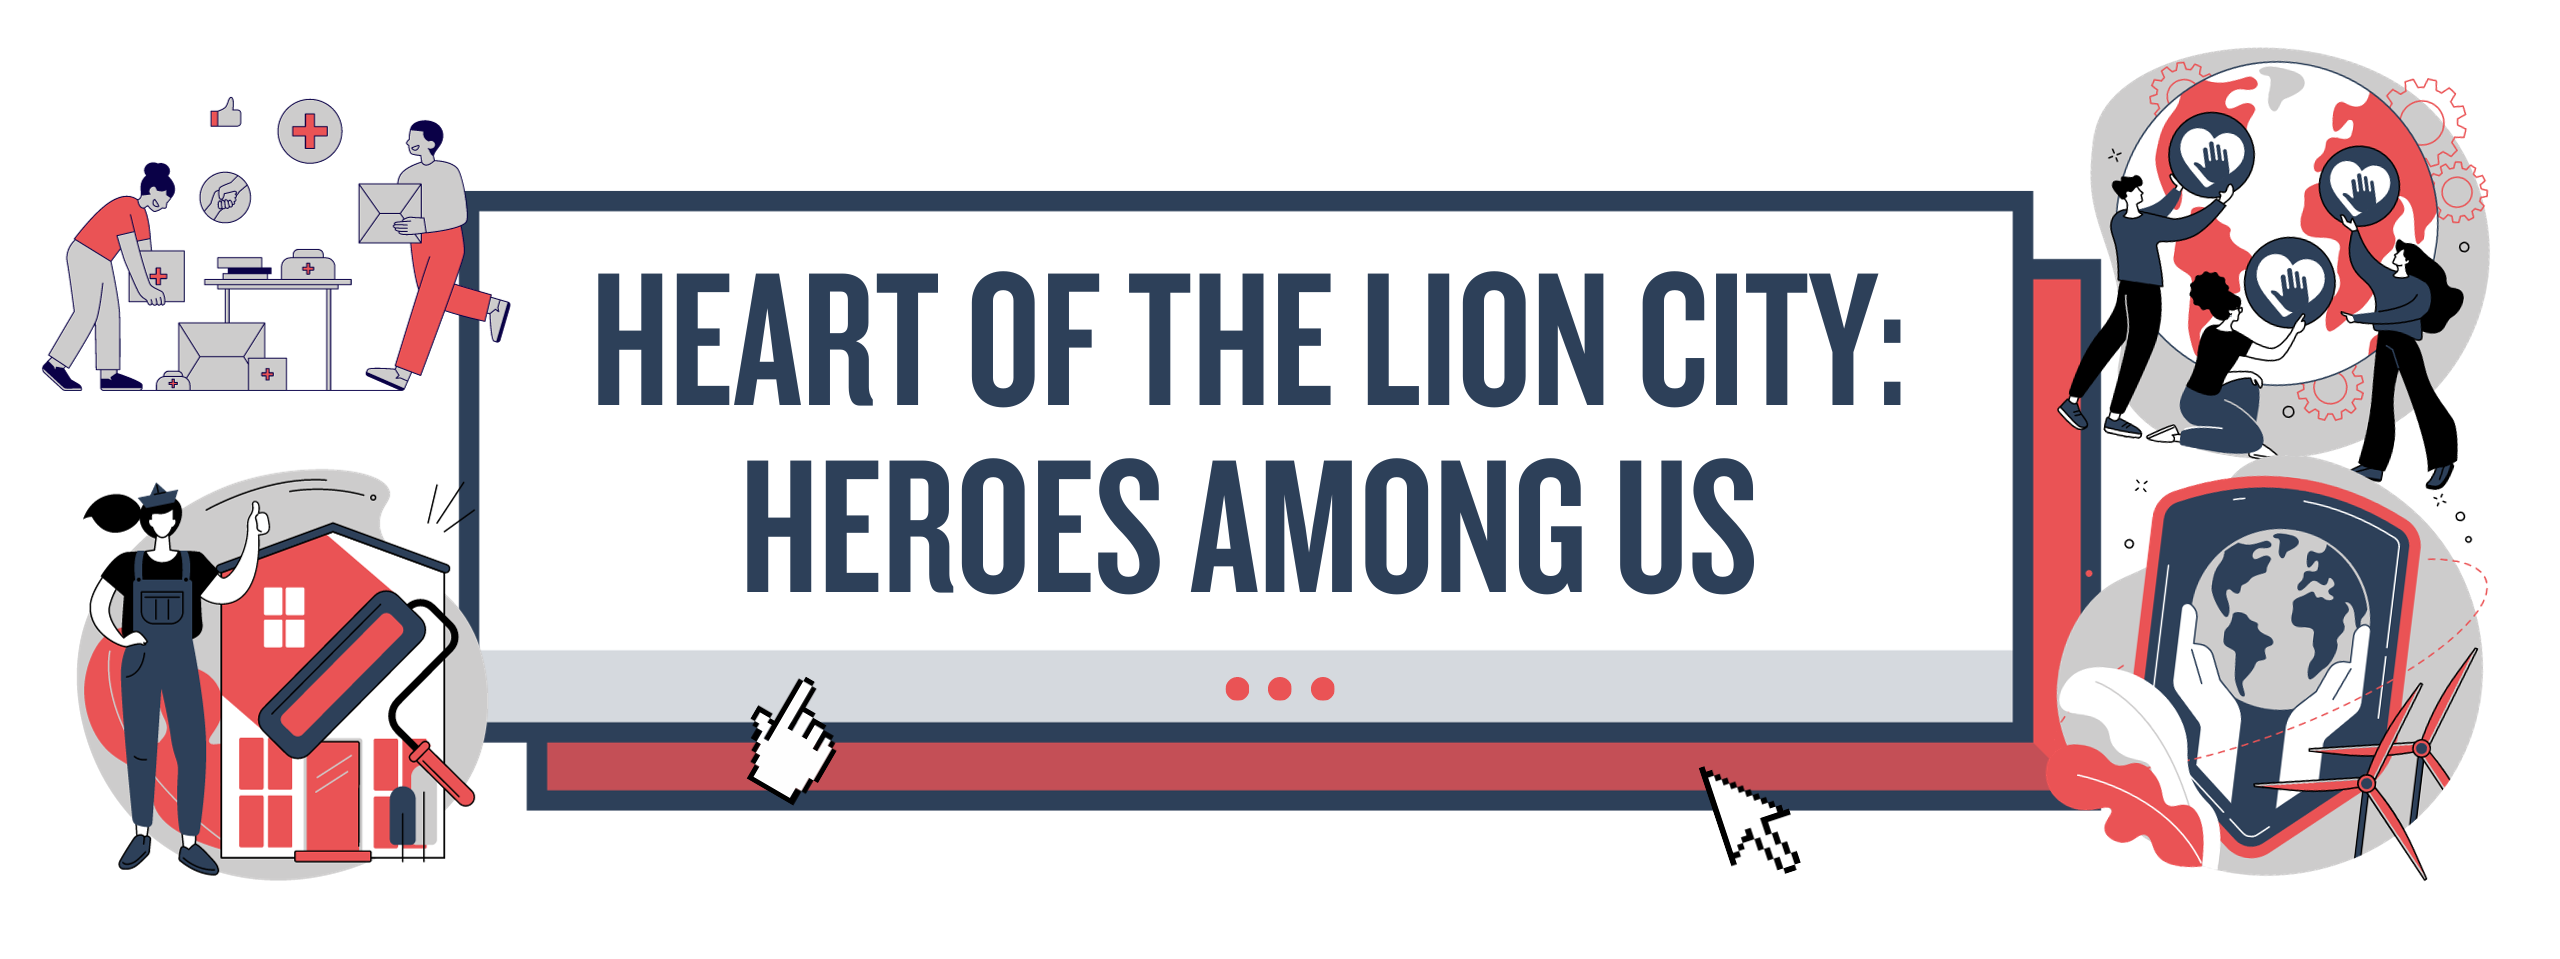 heart of the lion city